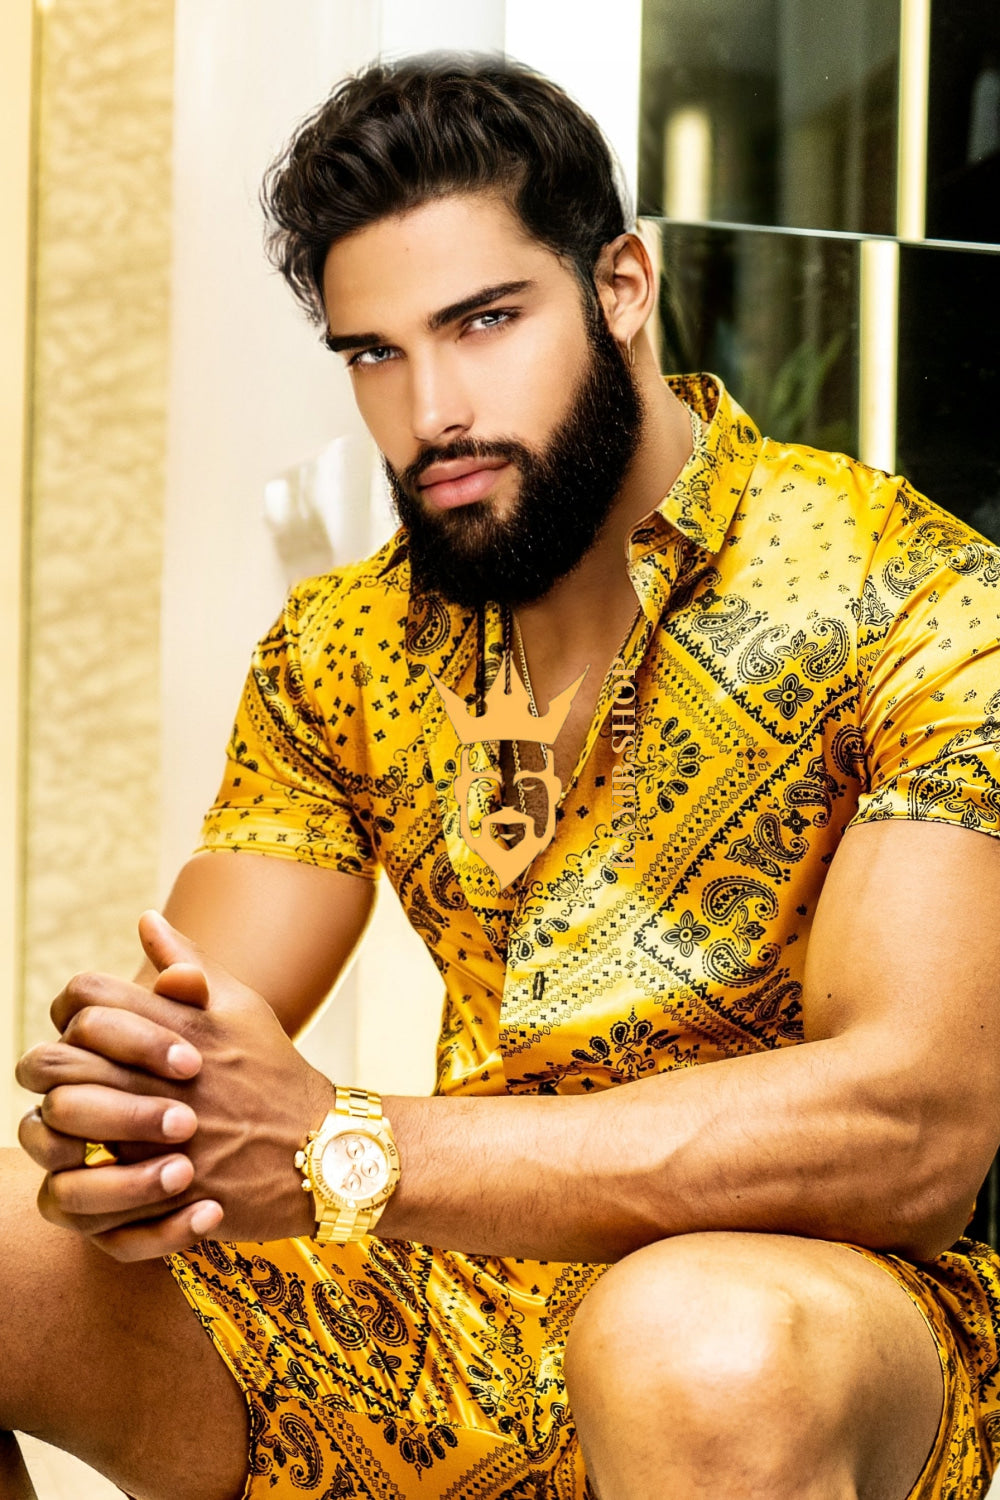 Gold Luxurious Barocco Print Set - The Ultimate Summer Silk Outfit for Men